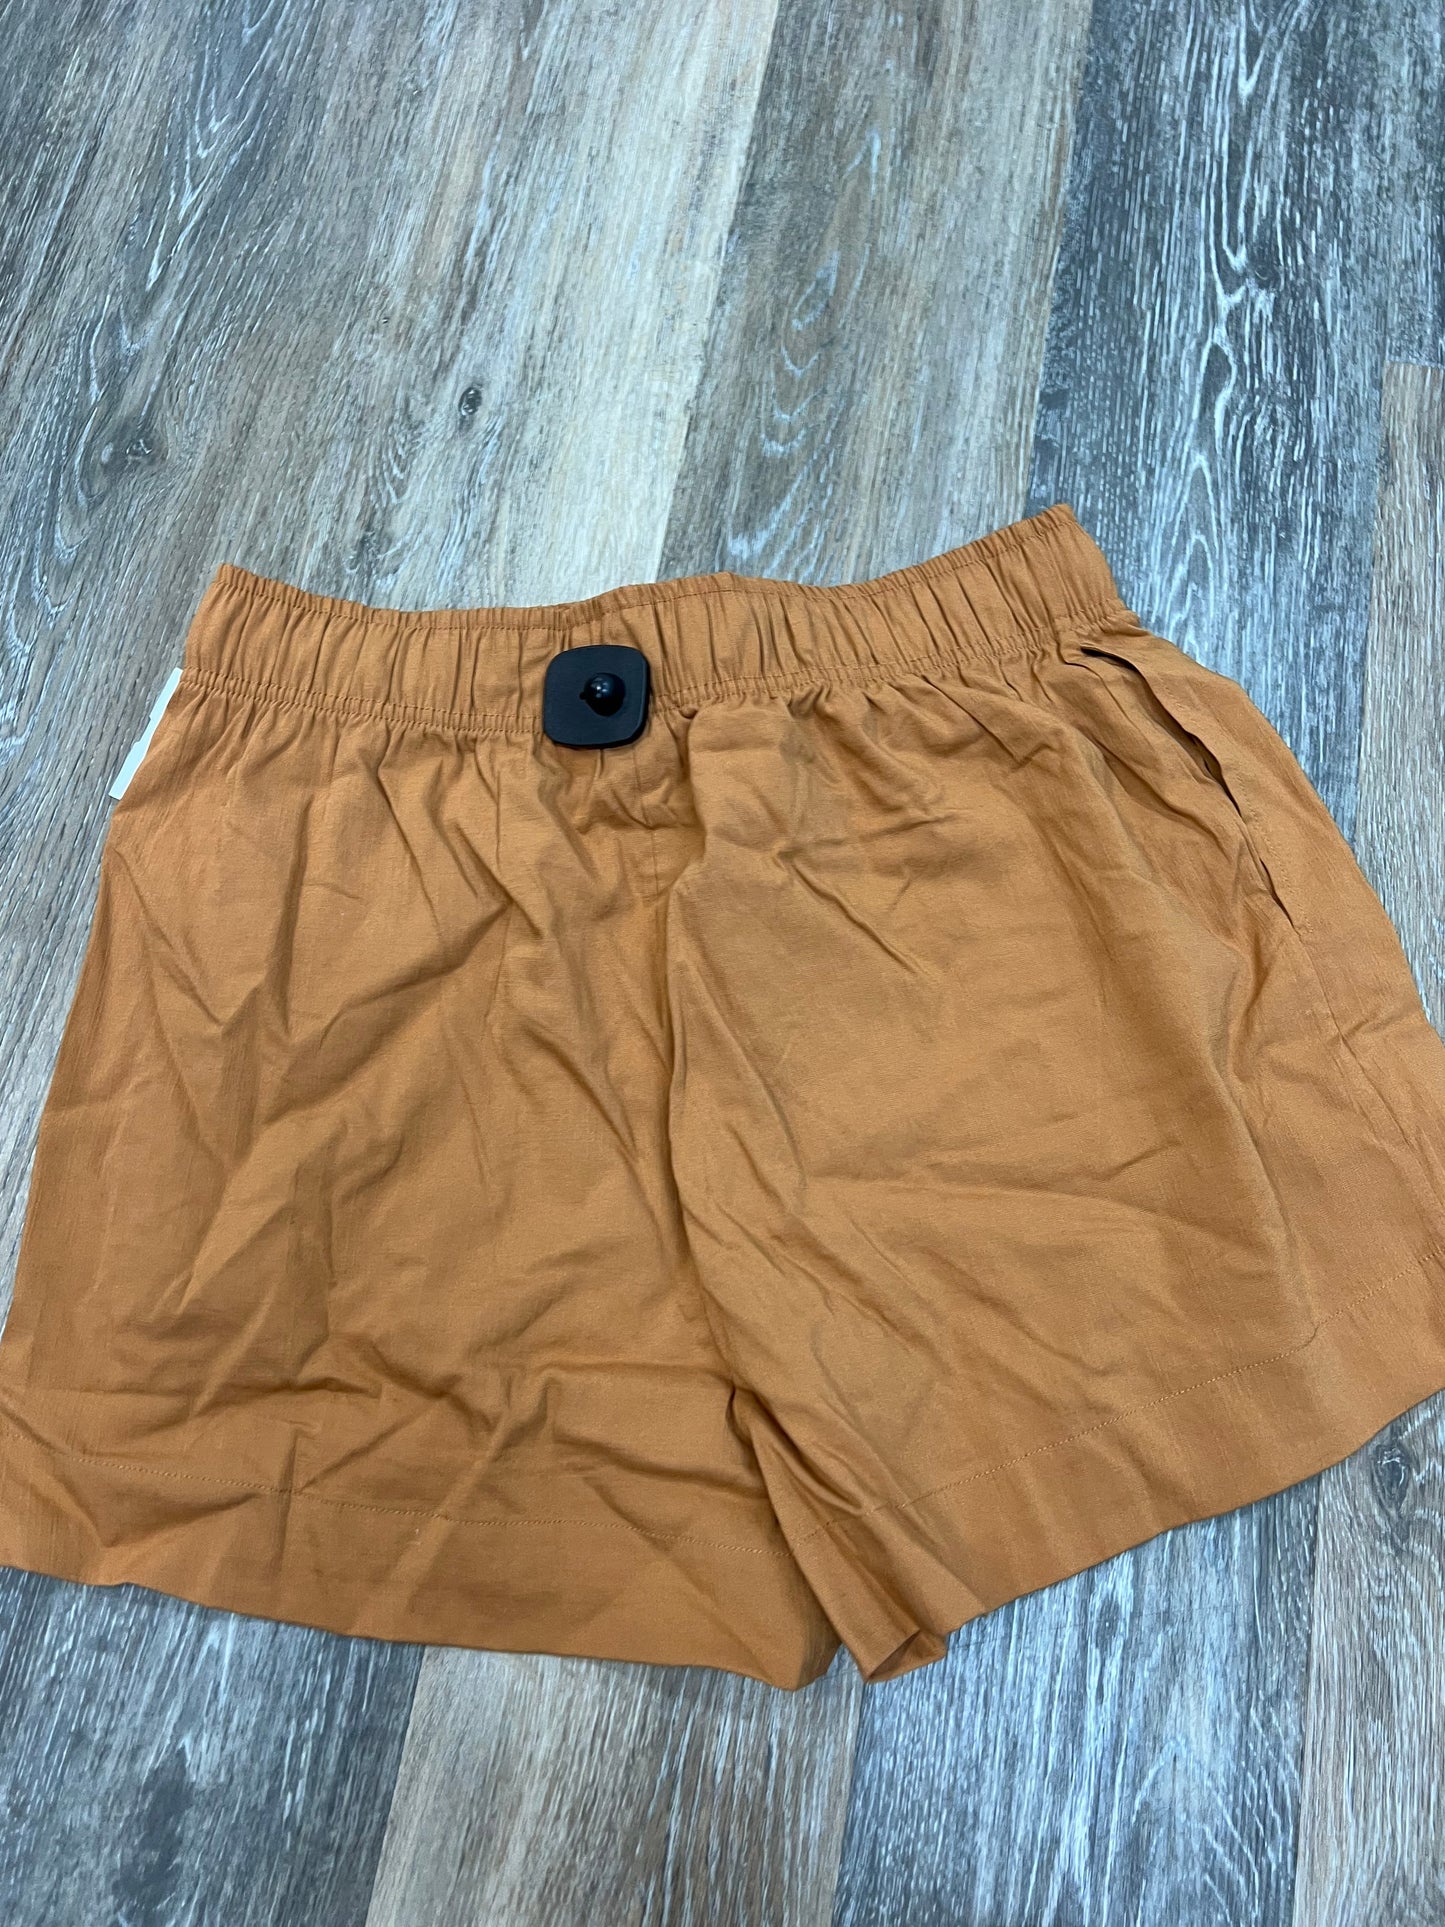 Shorts By Evereve  Size: L